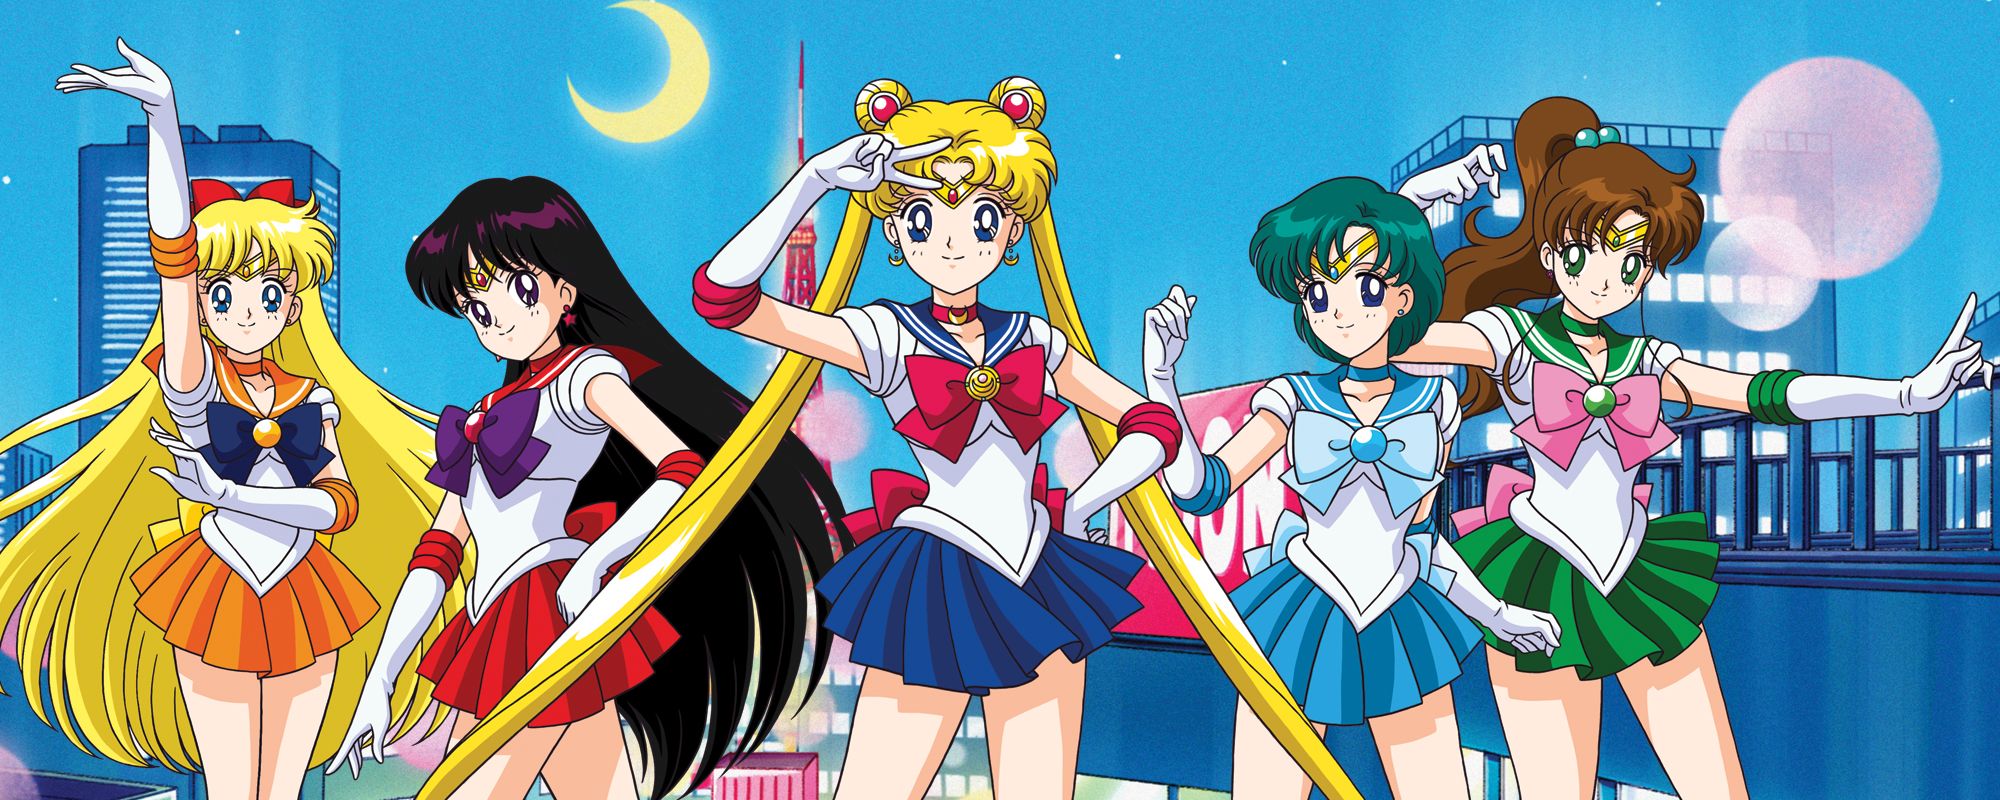 Sailor Moon Was Almost a Live-Action Disney Princess in the 1990s